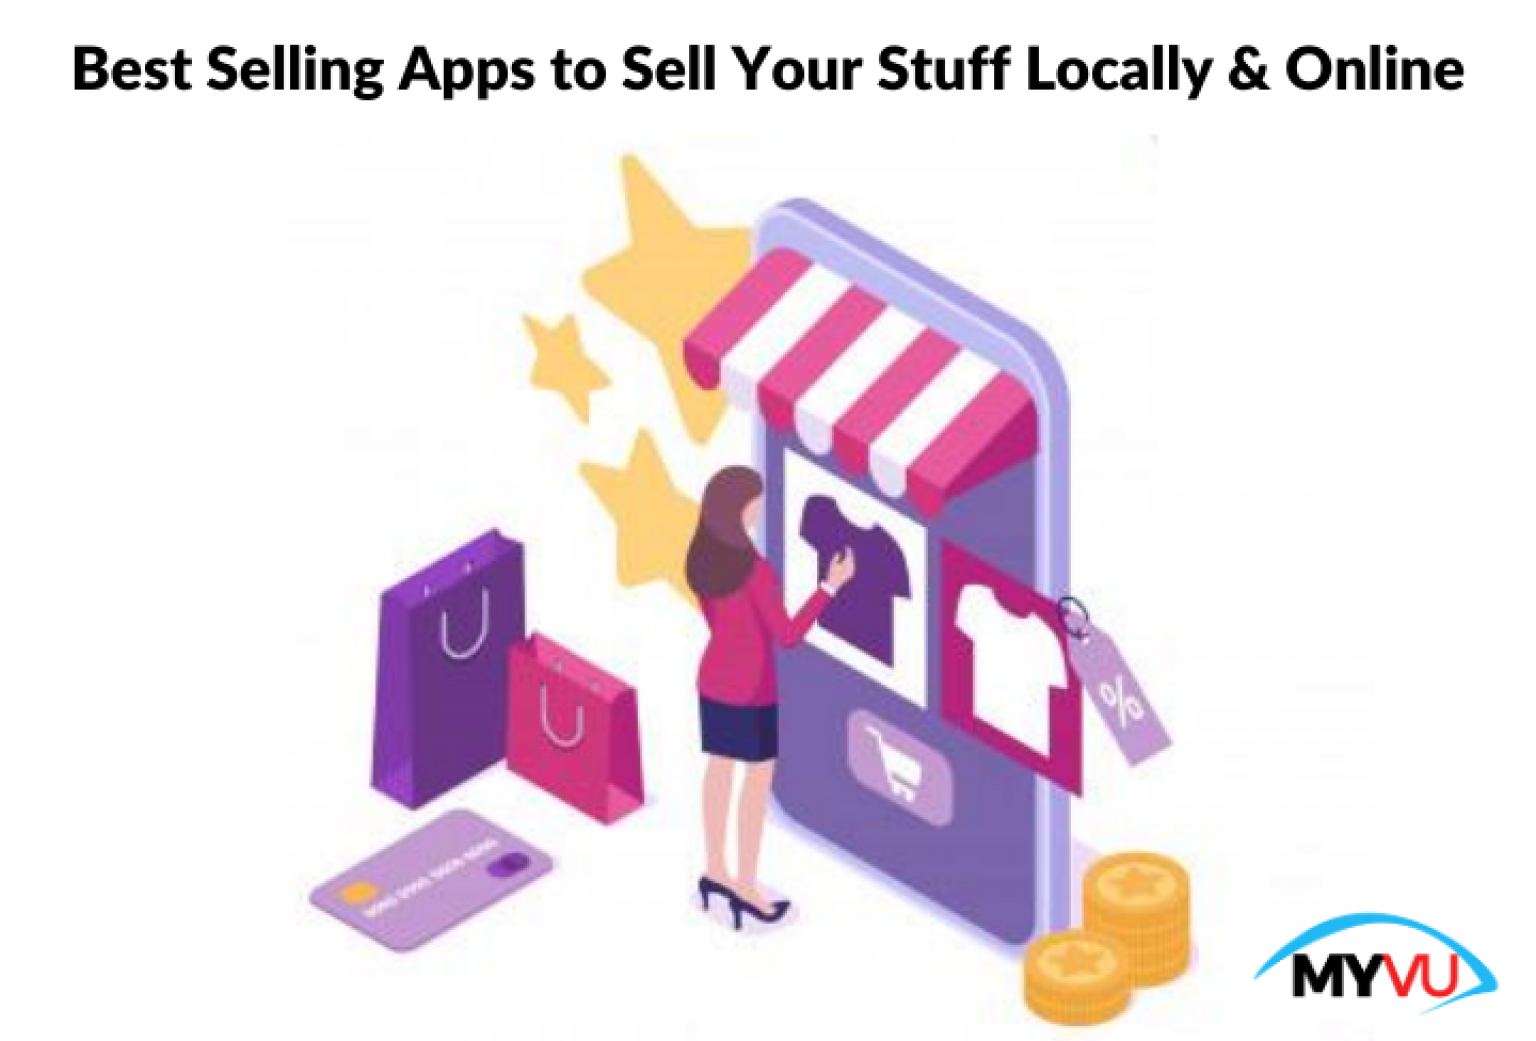 10 Best Selling Apps to Sell Your Stuff Locally and Online